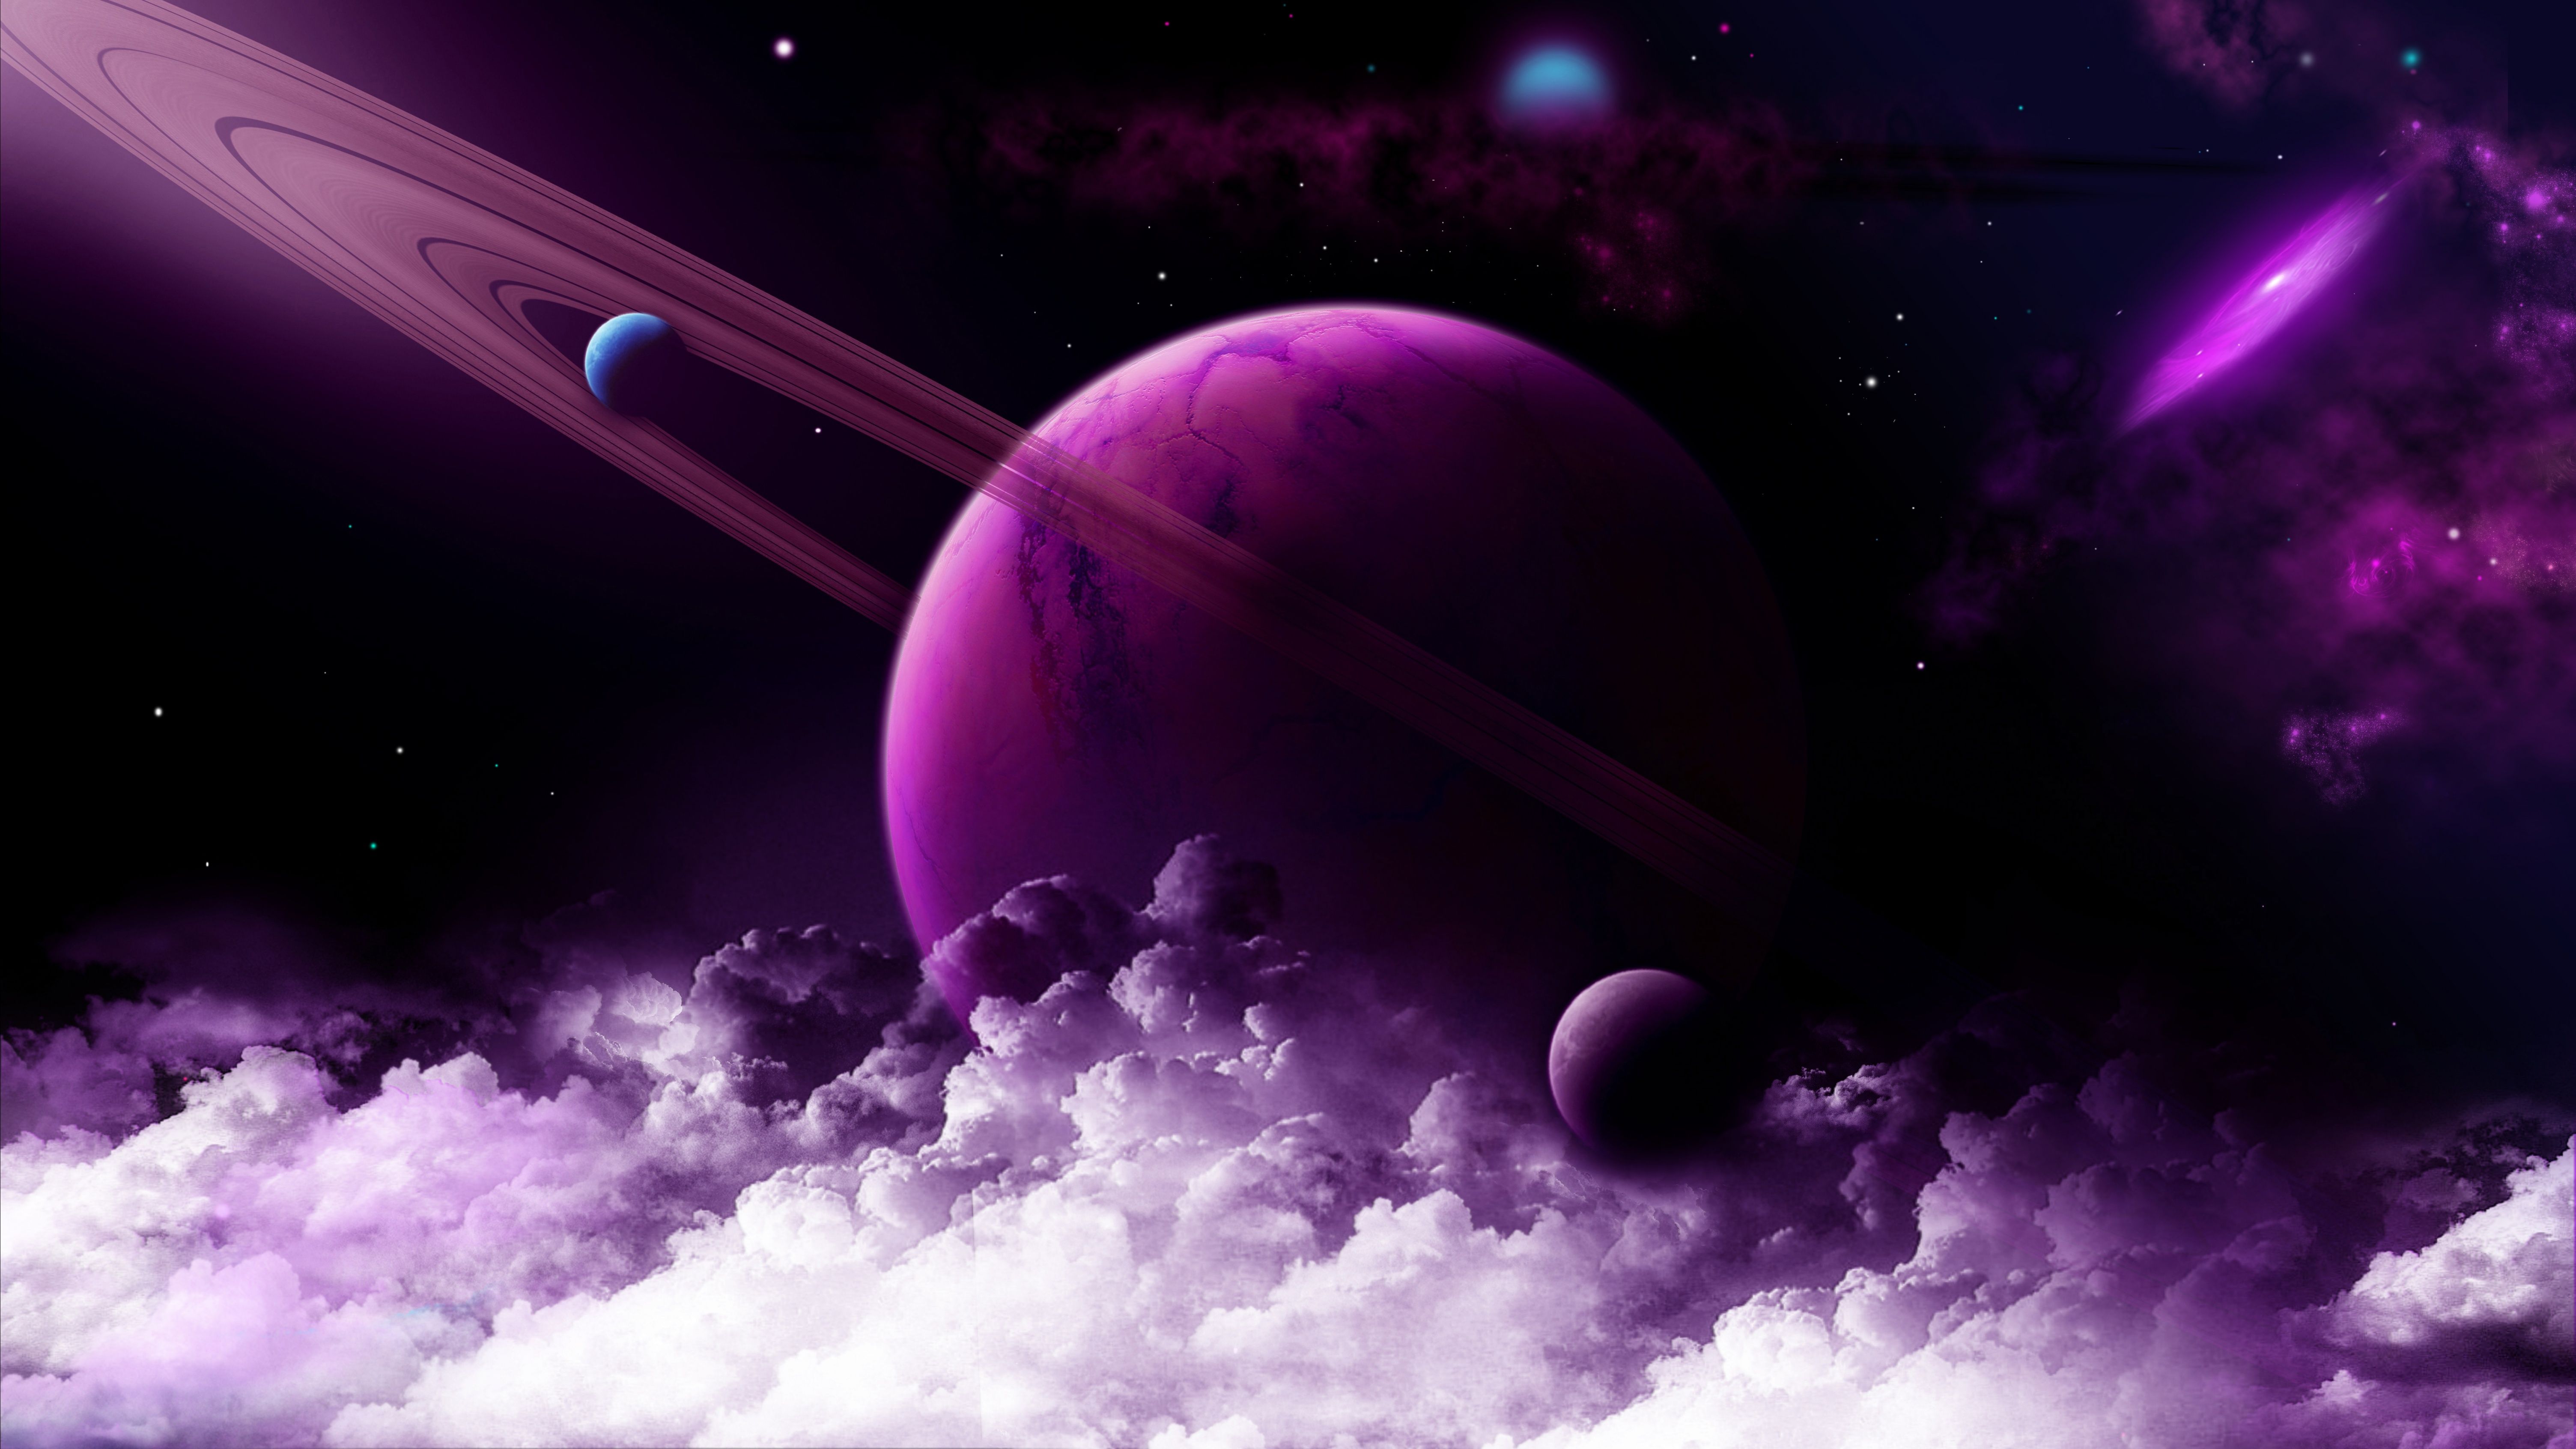 A purple planet with a ring system and two smaller planets. - Saturn, space, planet, galaxy